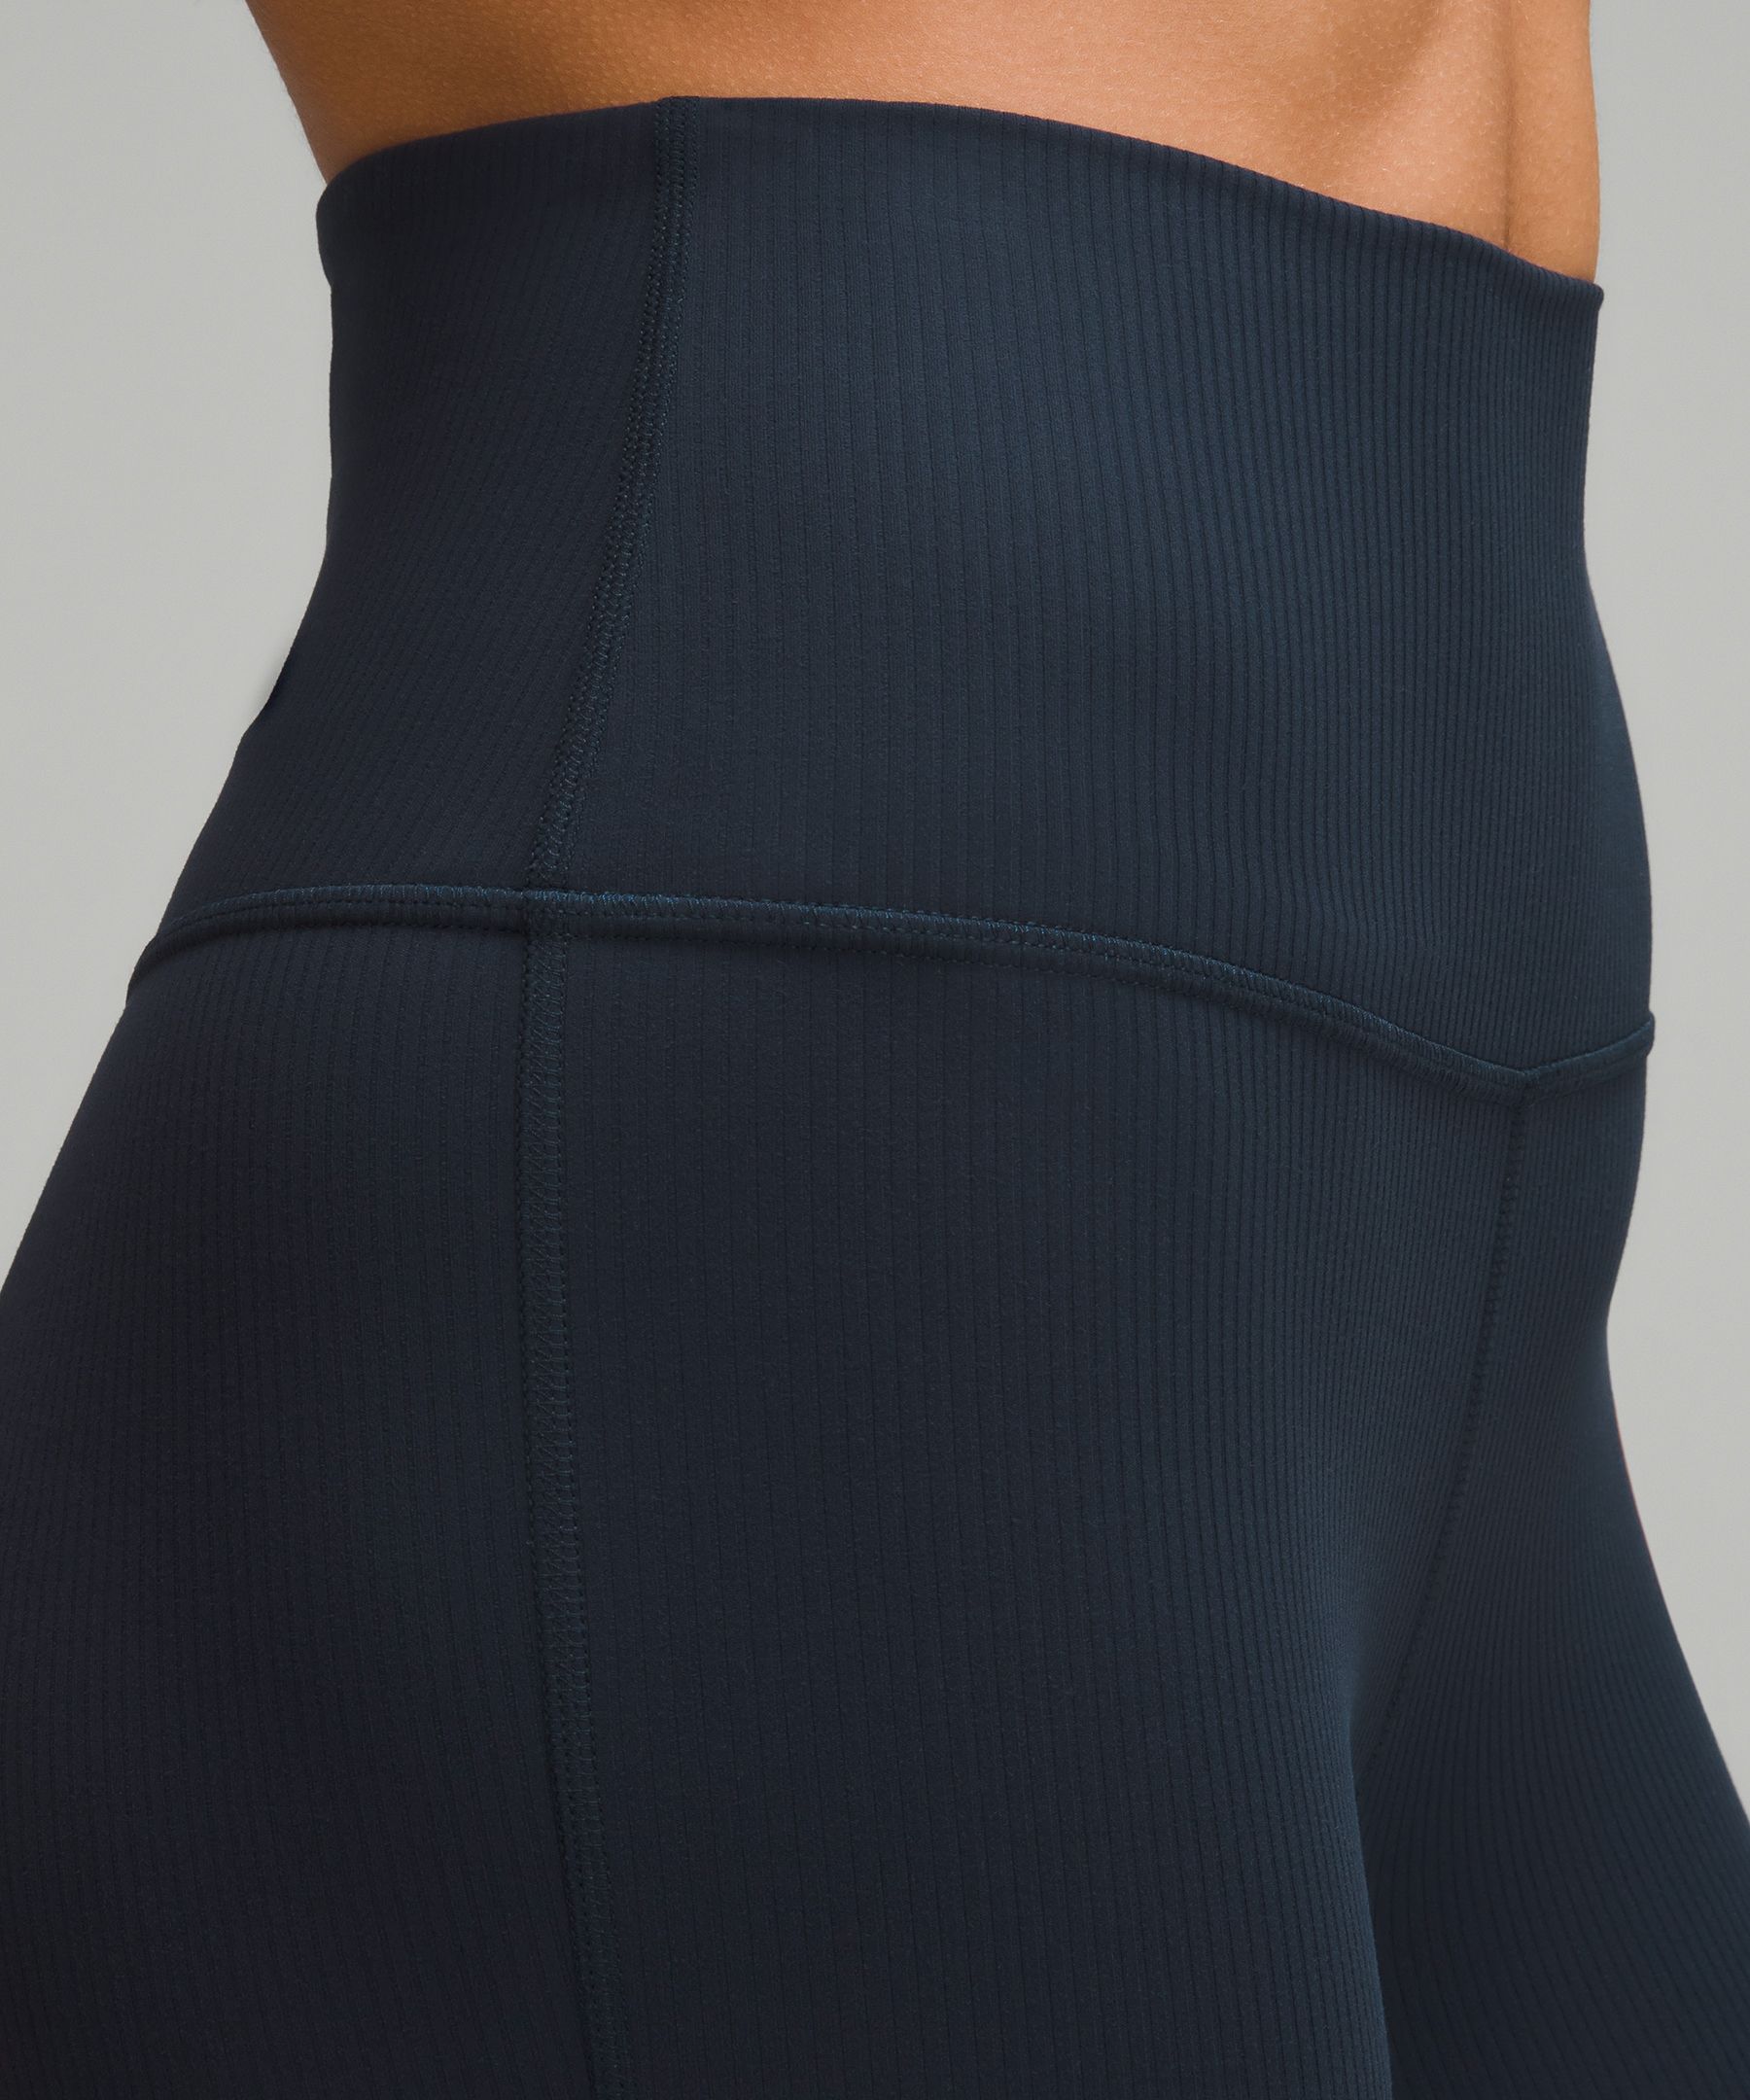 Girlies you better run to @lululemon and get the align mini flares imm